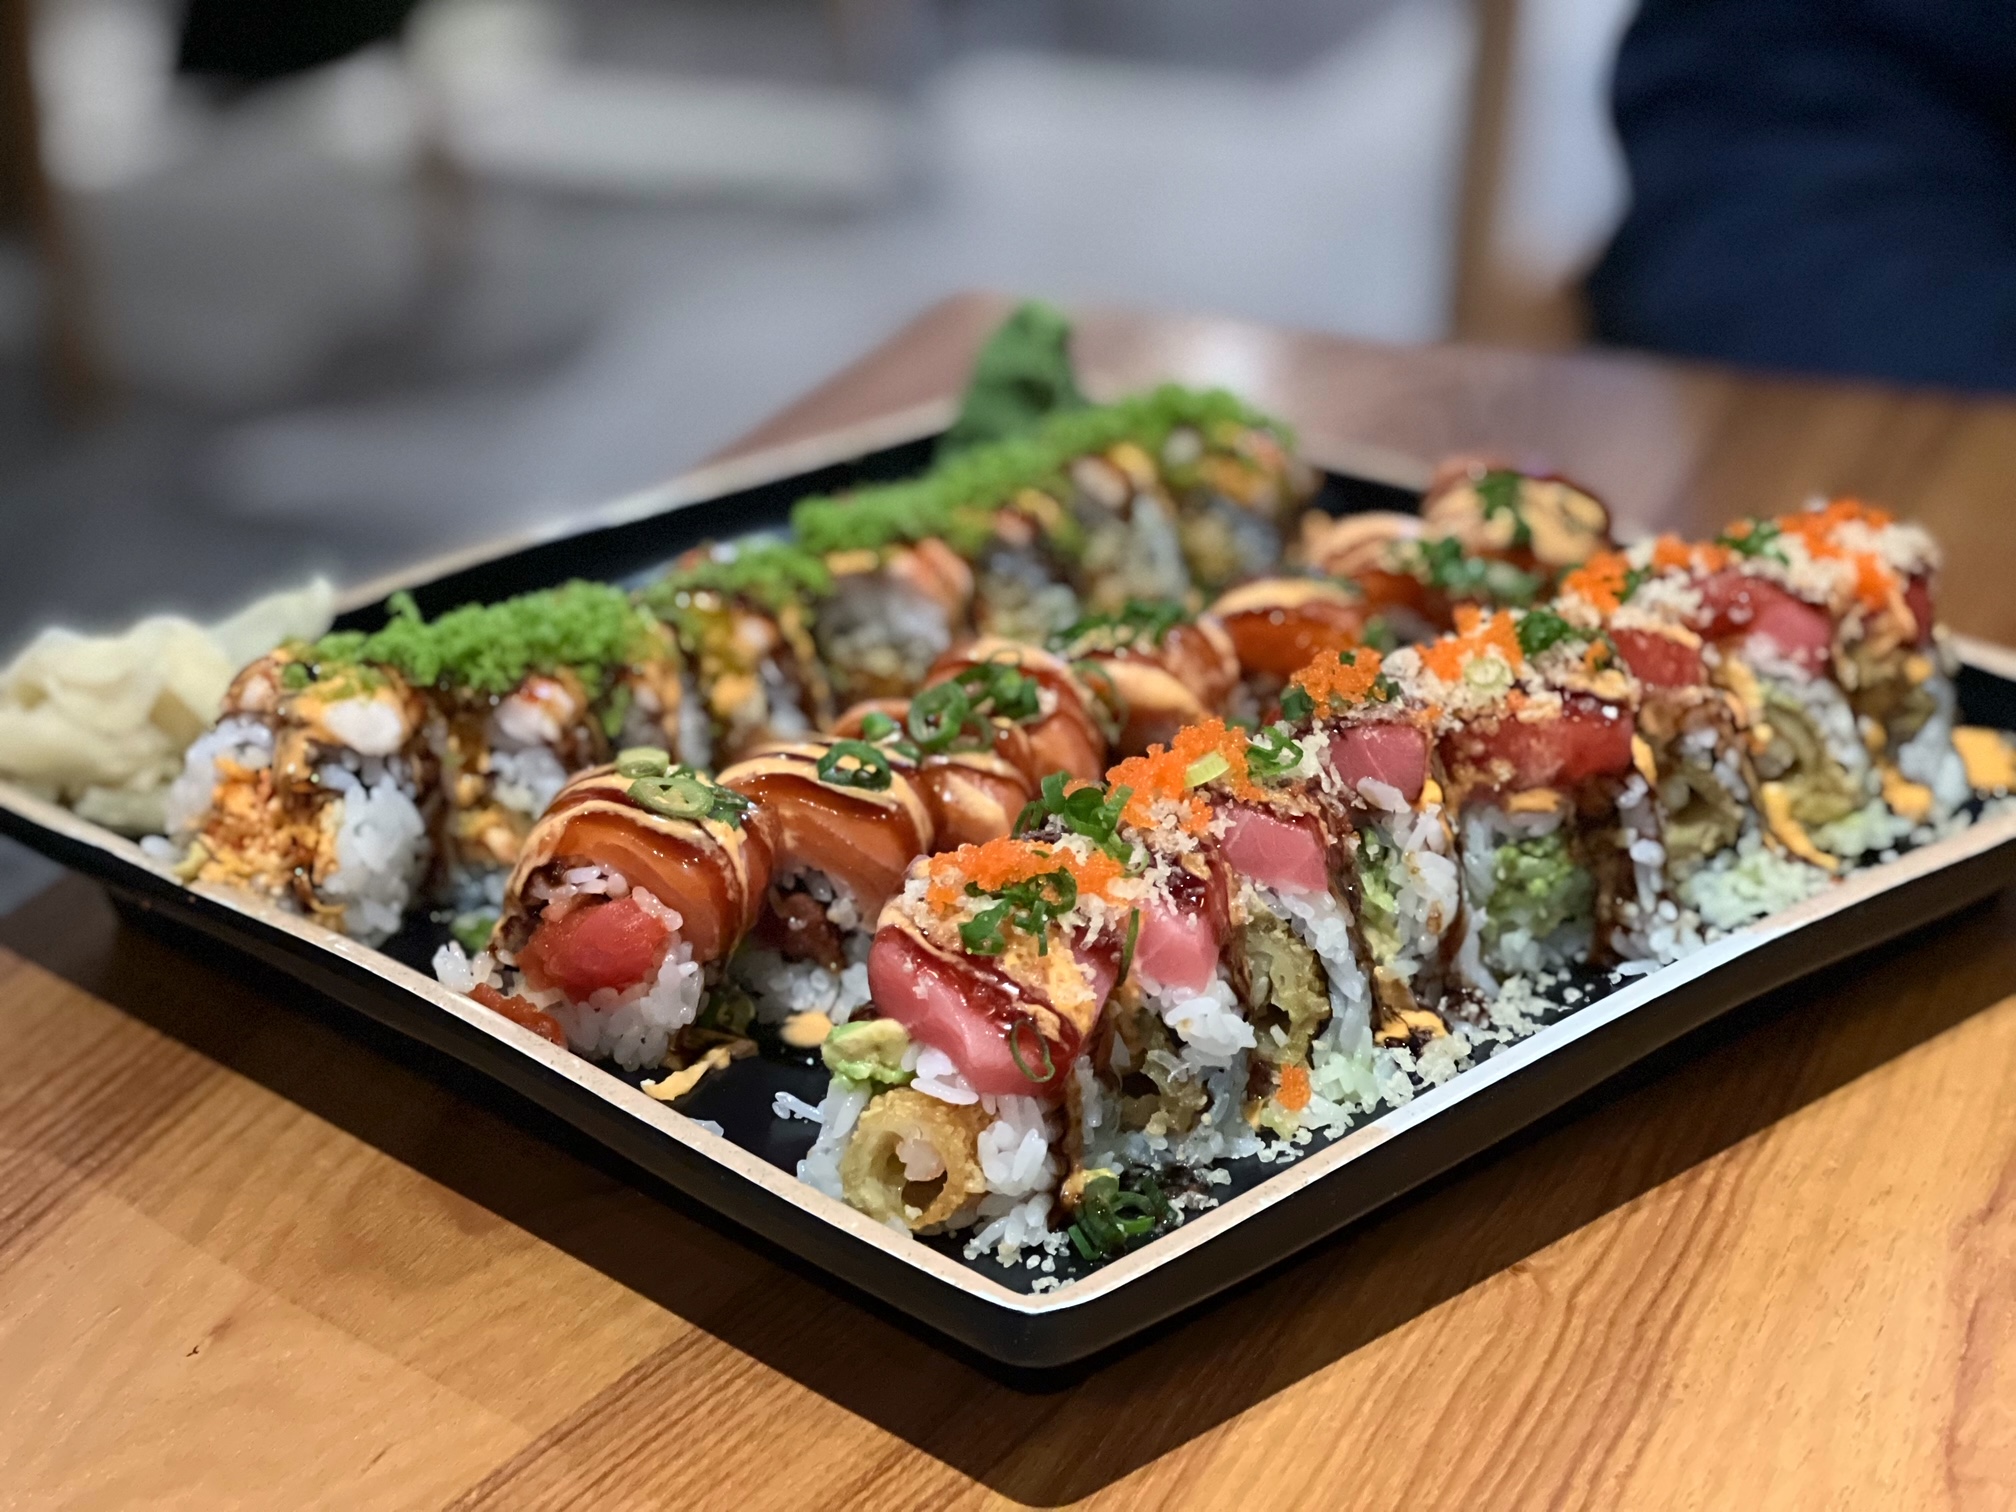 On a wooden table, there are three sushi rolls with various fish, sauces, colorful crunchies, and flakes. Photo by Alyssa Buckley.